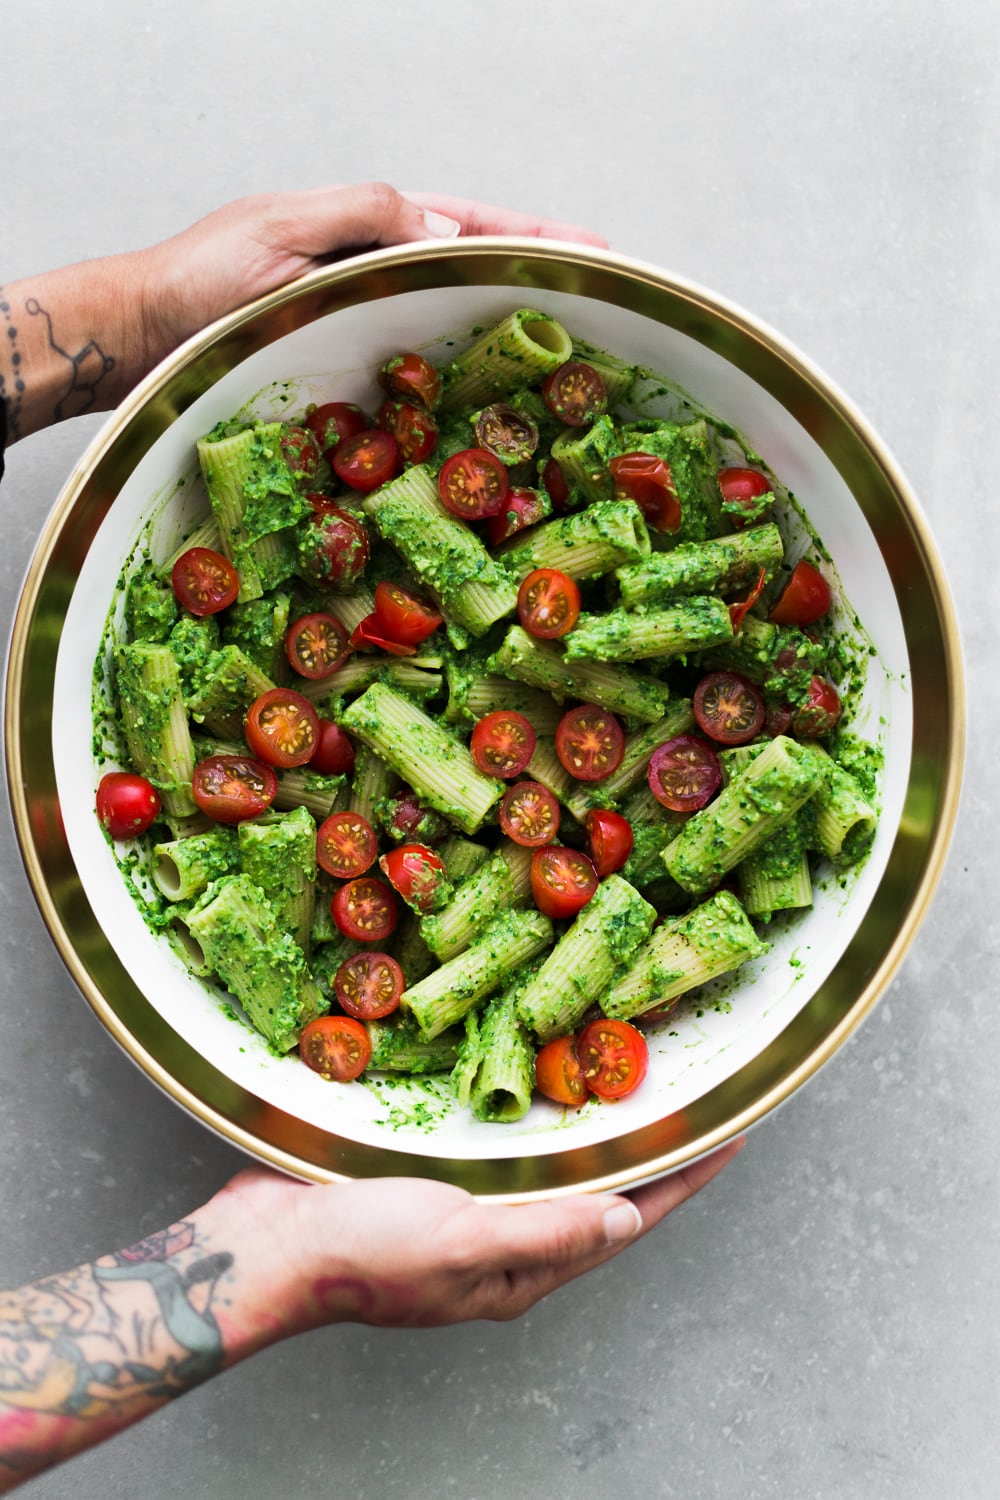 Looking for a quick and simple dinner? Try our this dairy free Avocado Pesto Pasta - ready in under 15 minutes and loaded with bucket fulls of flavor! #vegan #tomato #healthy #avocado #pesto #pasta #simple #quick #pestopasta #dairyfree